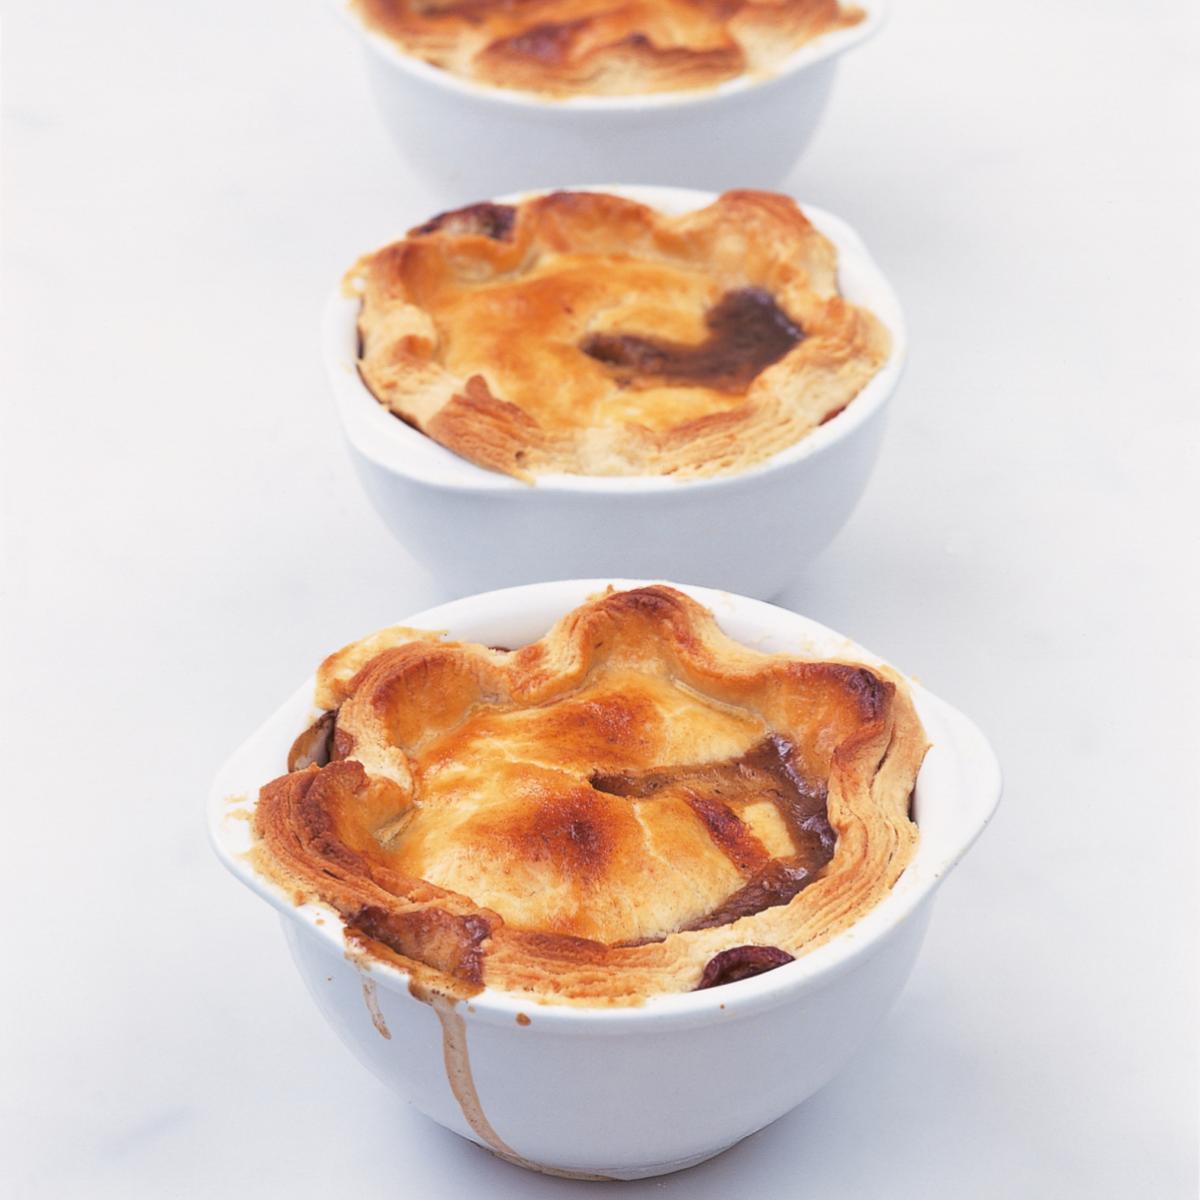 A picture of Delia's Individual Steak, Mushroom and Kidney Pies recipe